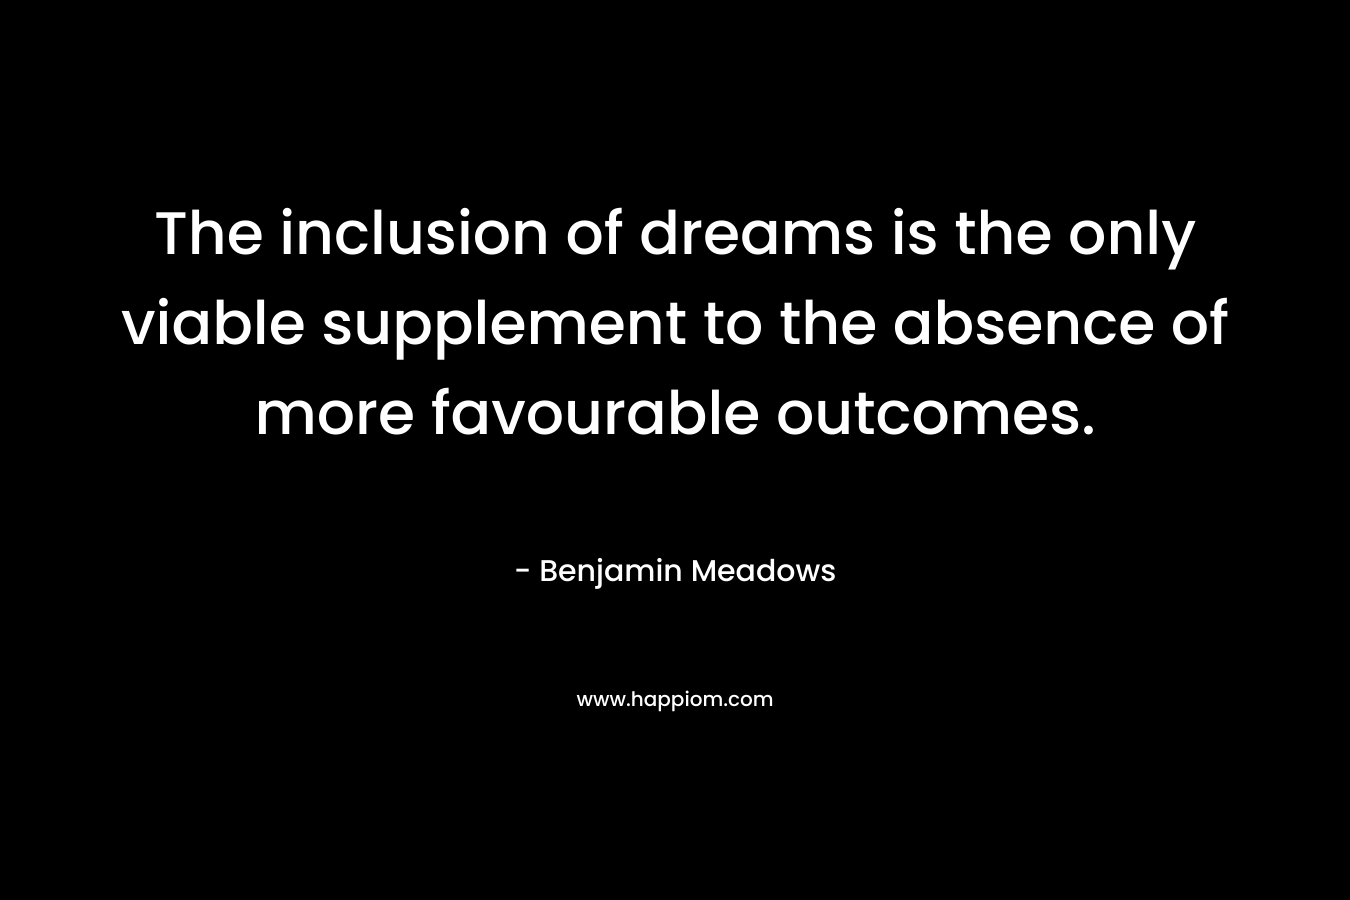 The inclusion of dreams is the only viable supplement to the absence of more favourable outcomes.